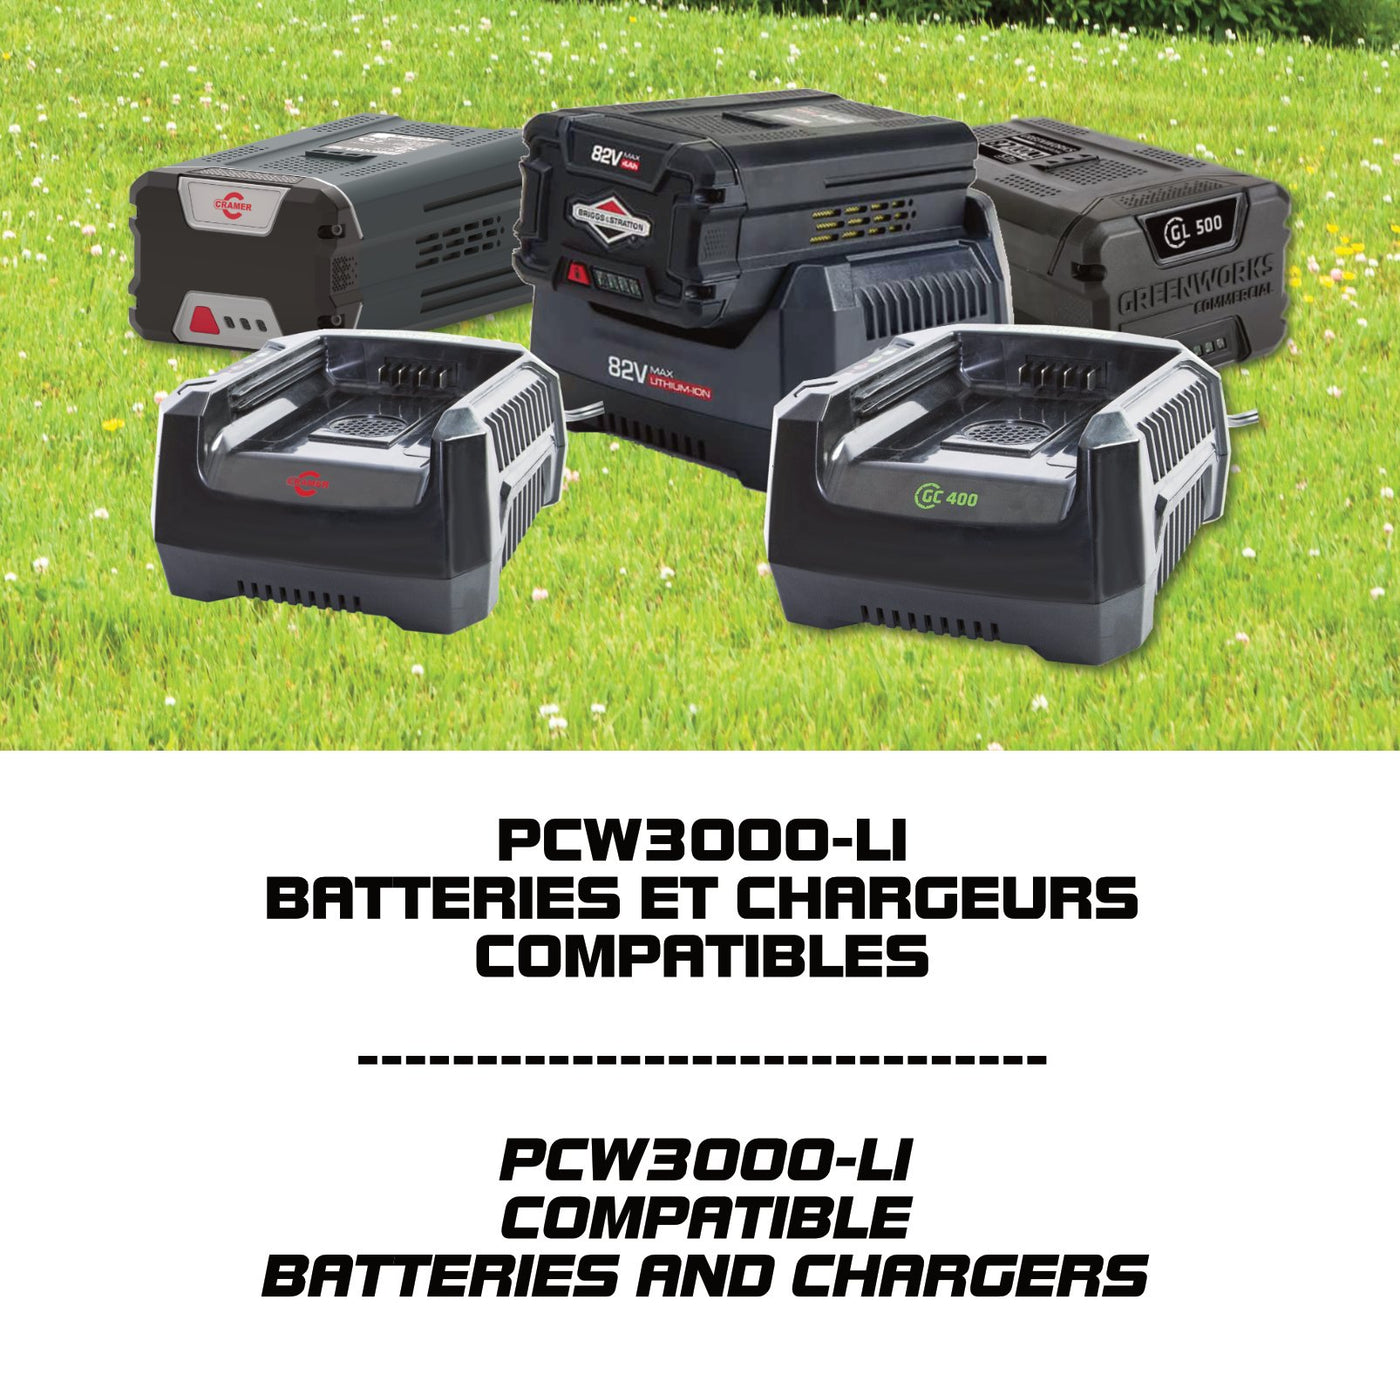 PCW3000-Li <BR> COMPATIBLE BATTERIES AND CHARGERS